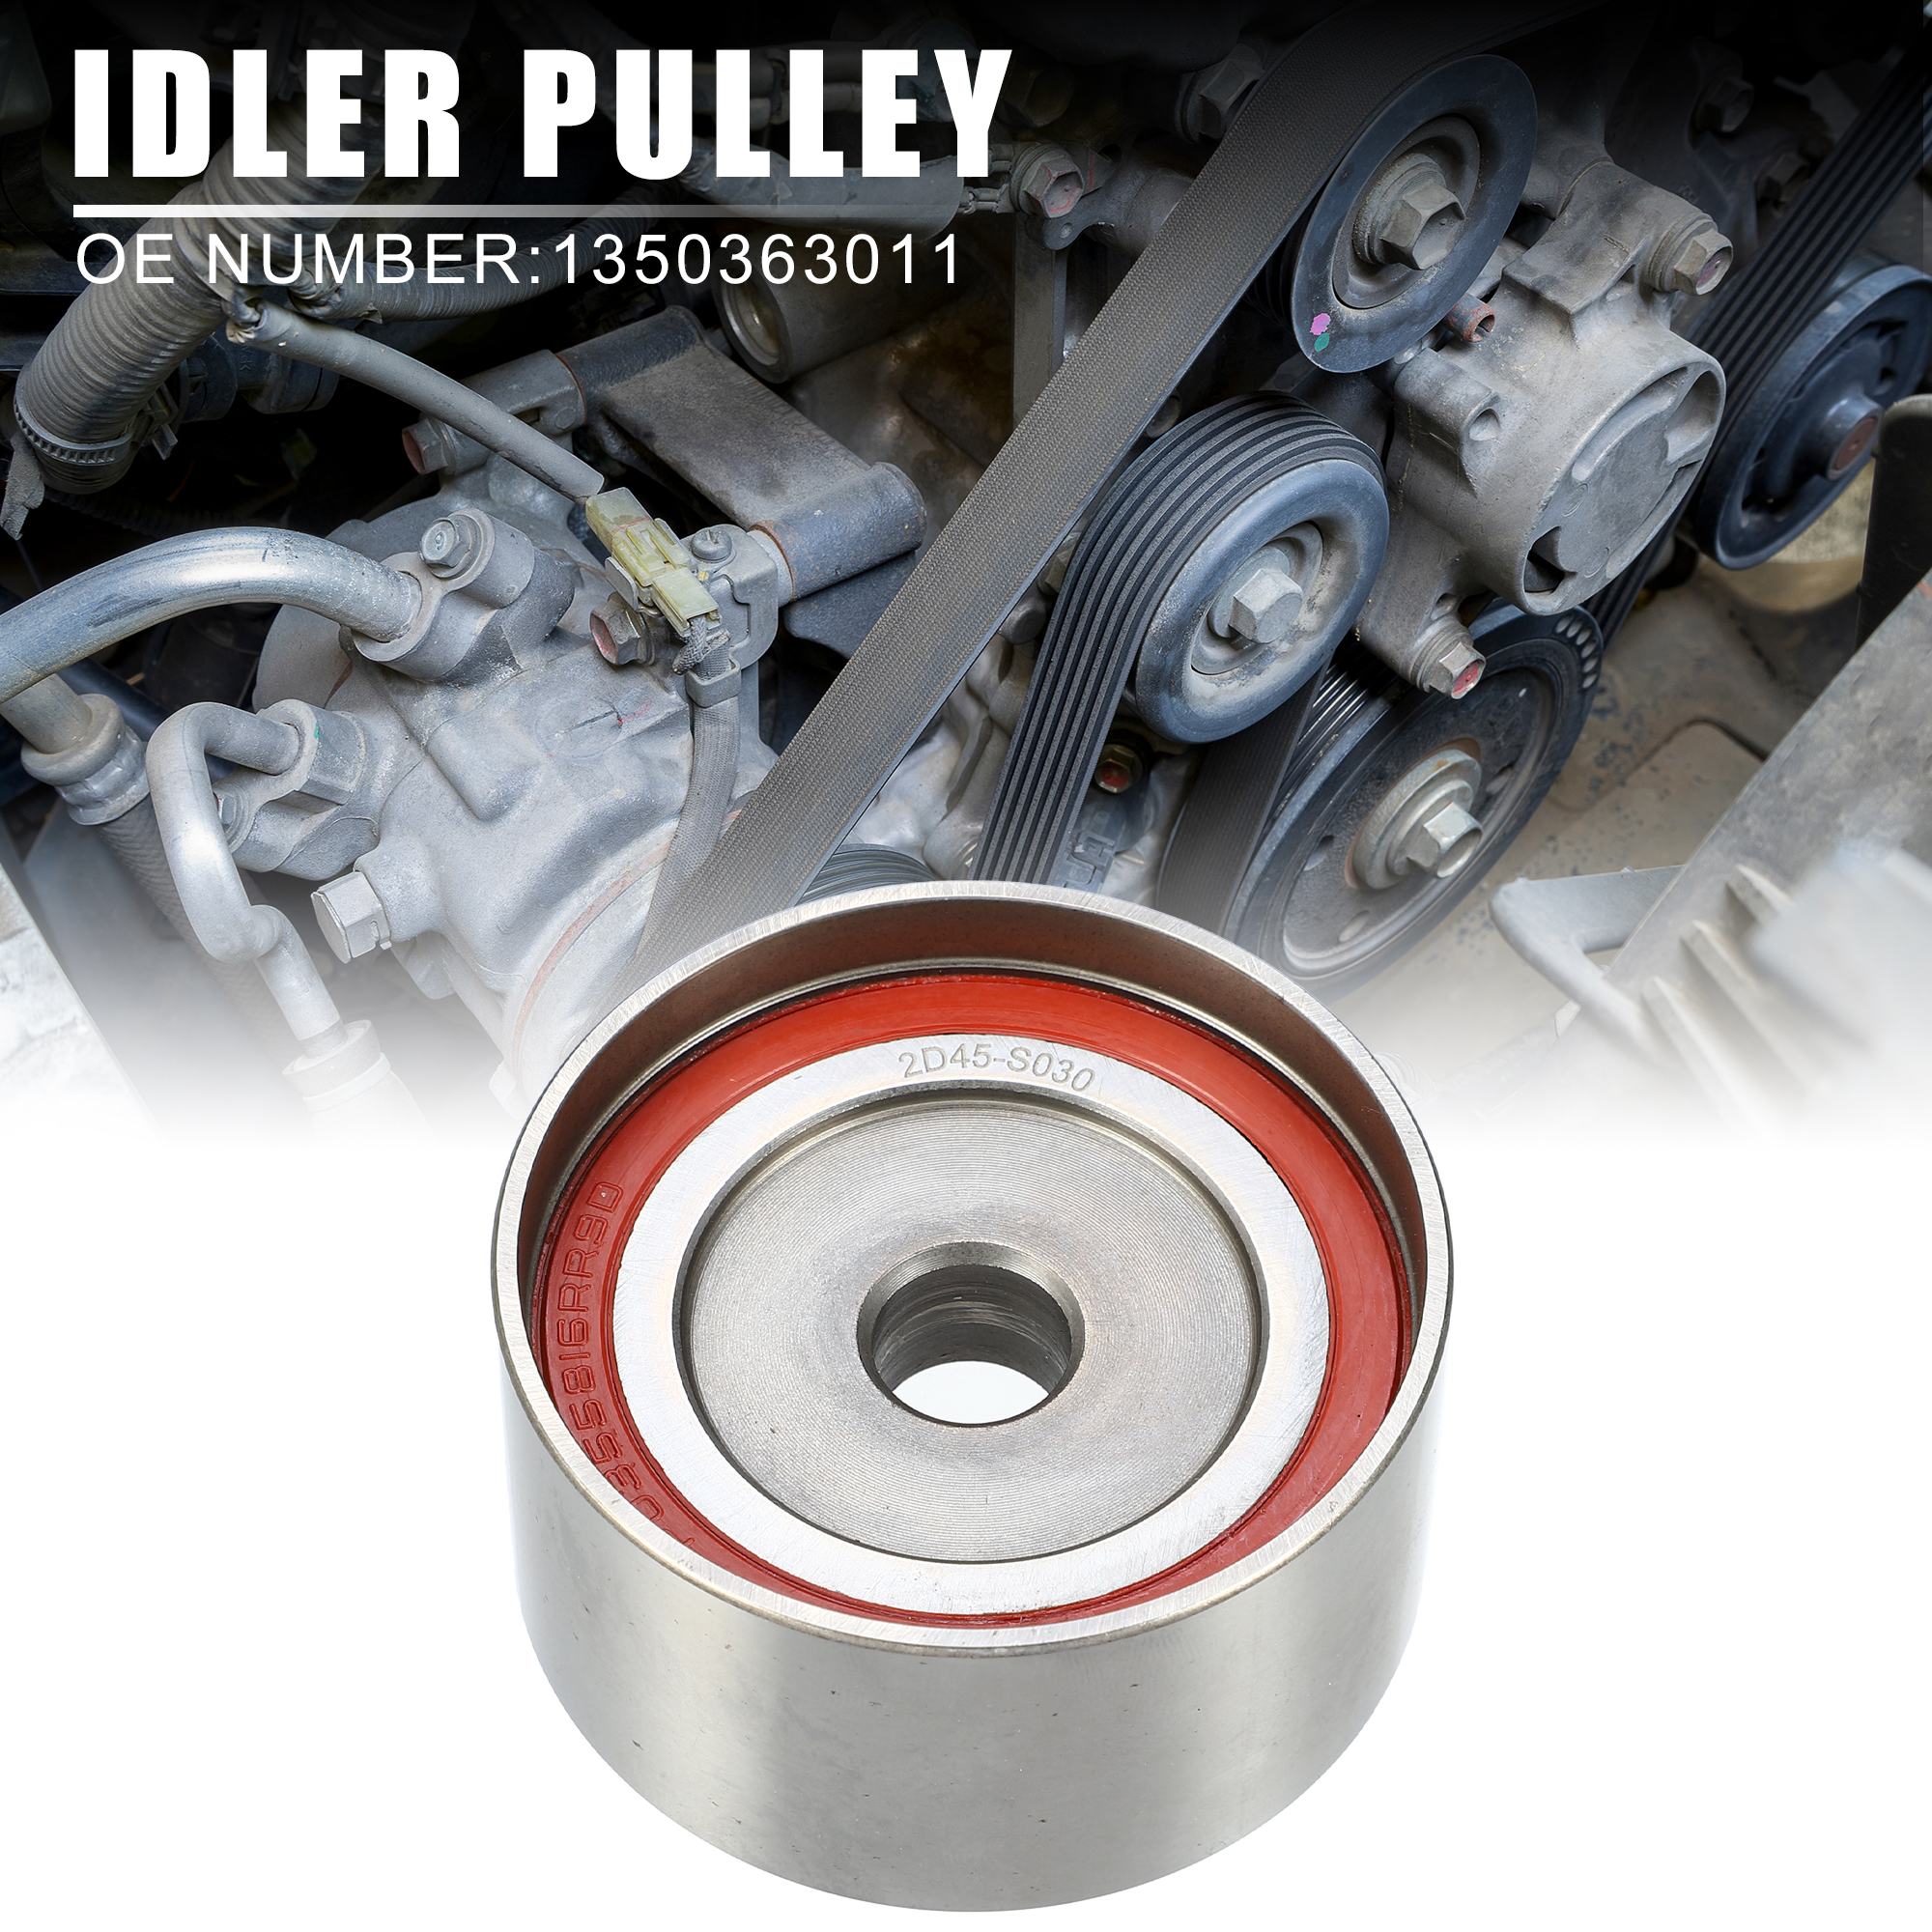 Unique Bargains Car Timing Belt Idler Pulley Grooved Pulley for Toyota Camry 2.2L 1983-2001